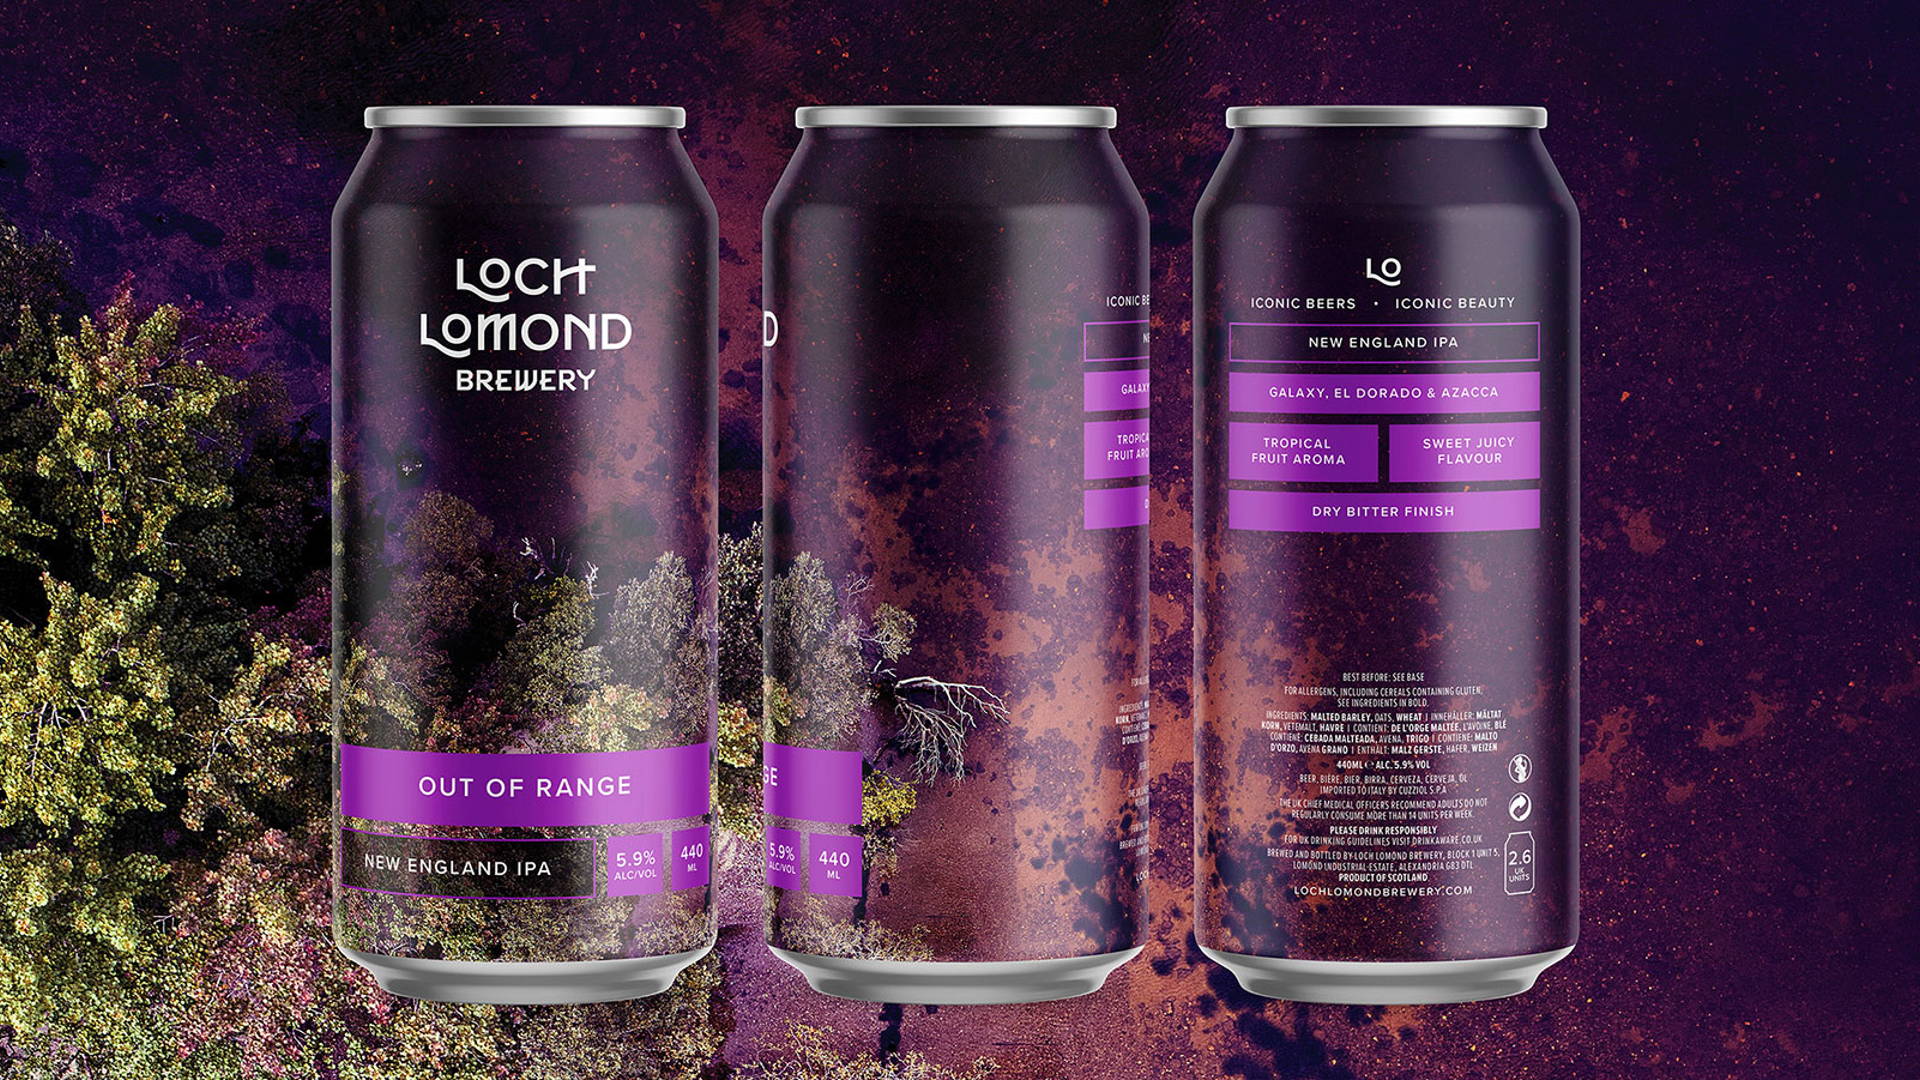 Featured image for Loch Lomond Brewery's Second Release Incorporates Breathtaking Photography of The Land It's From